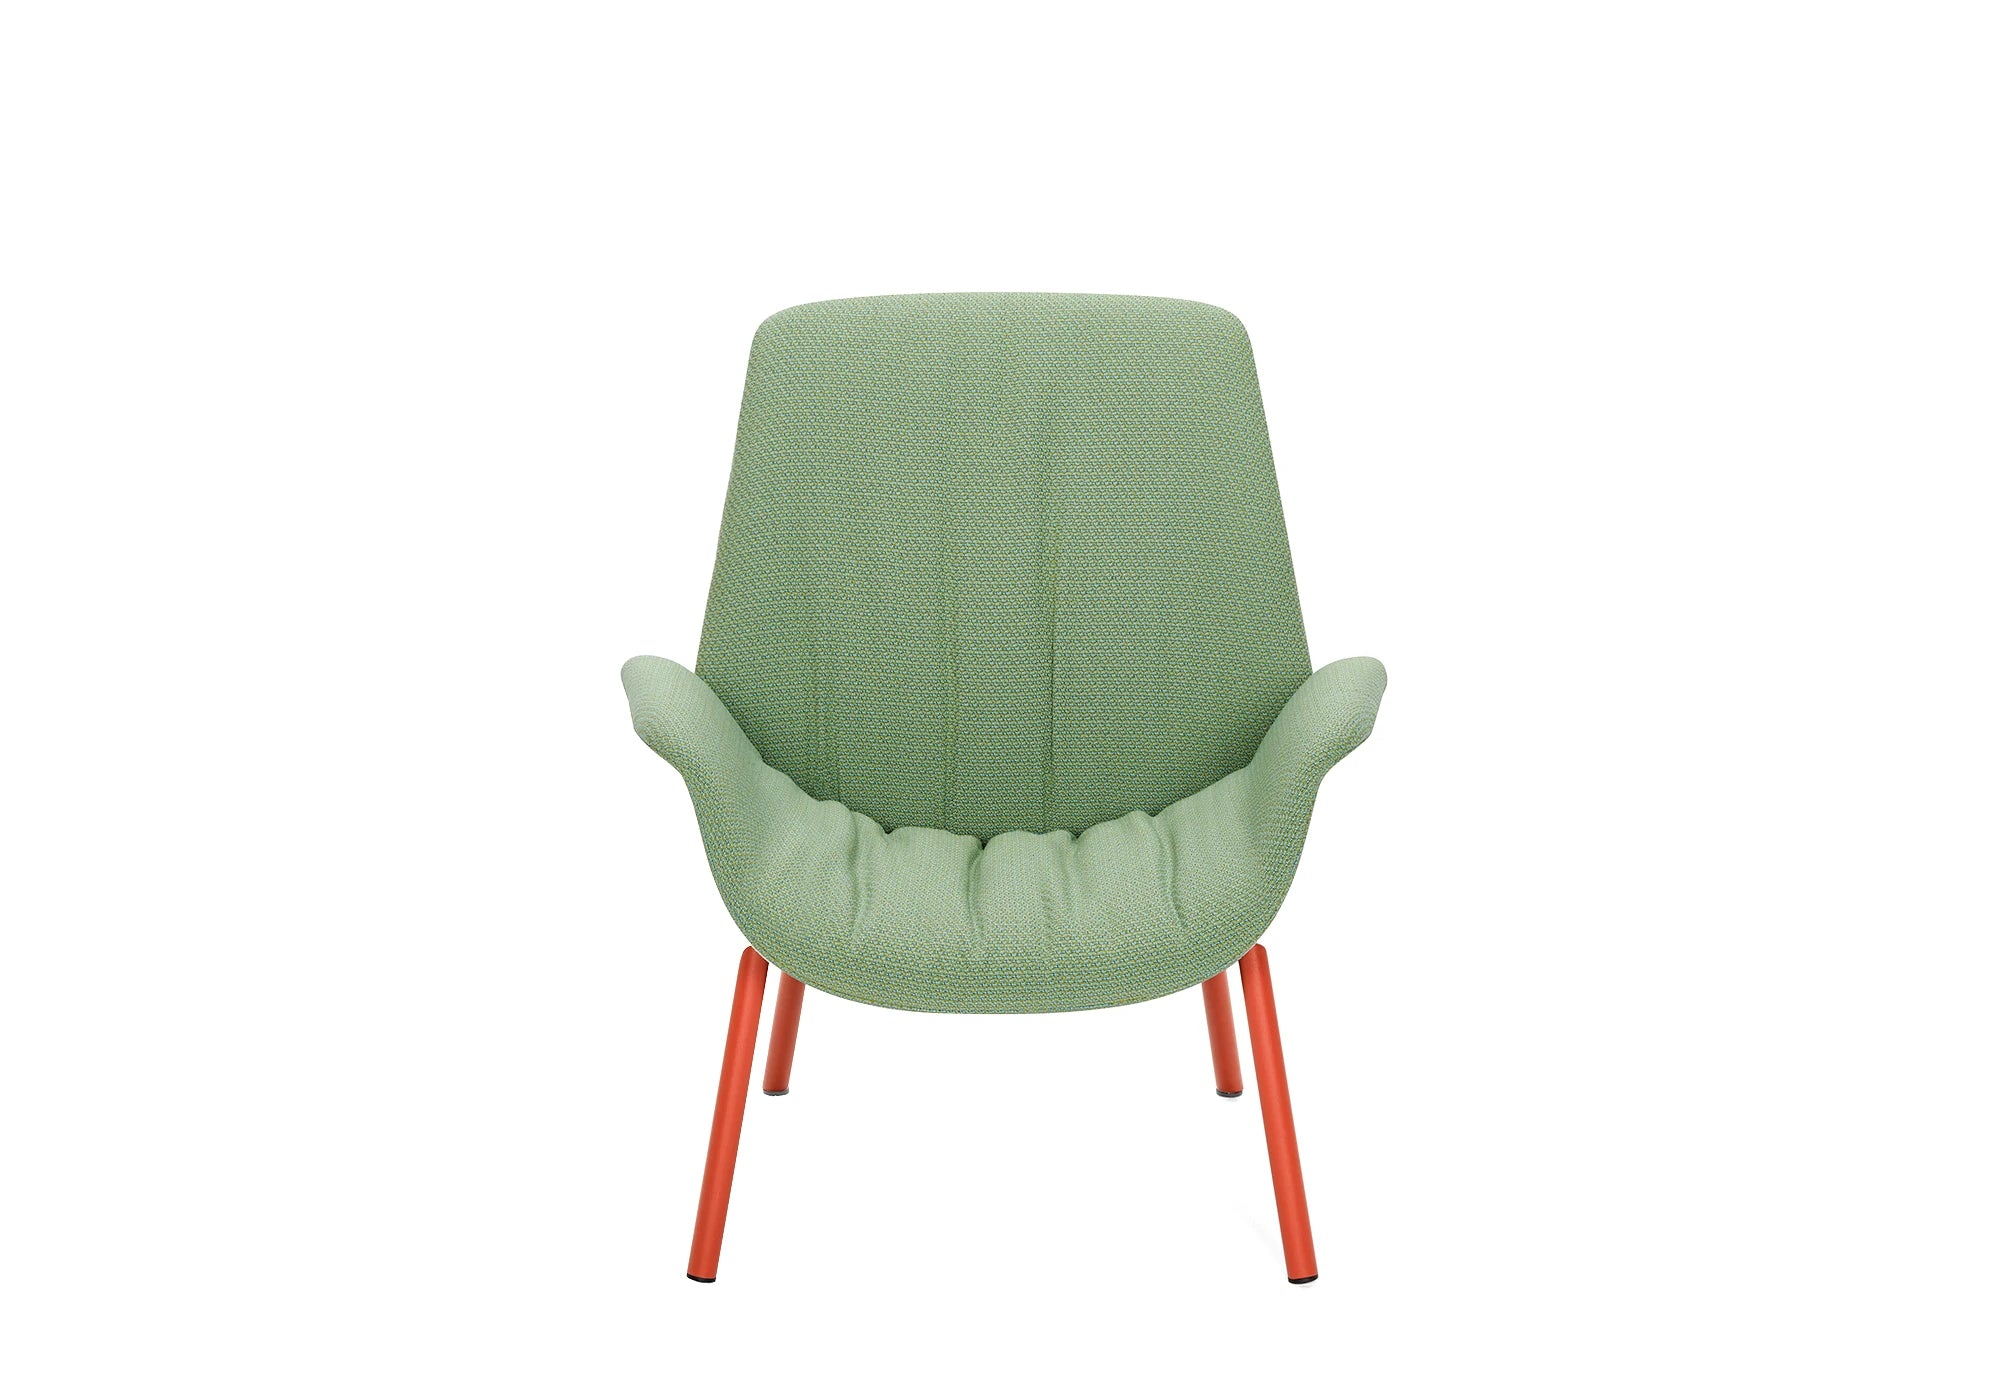 Pedrali Ila Lounge Armchair With Four Legs In Steel Tube Frame